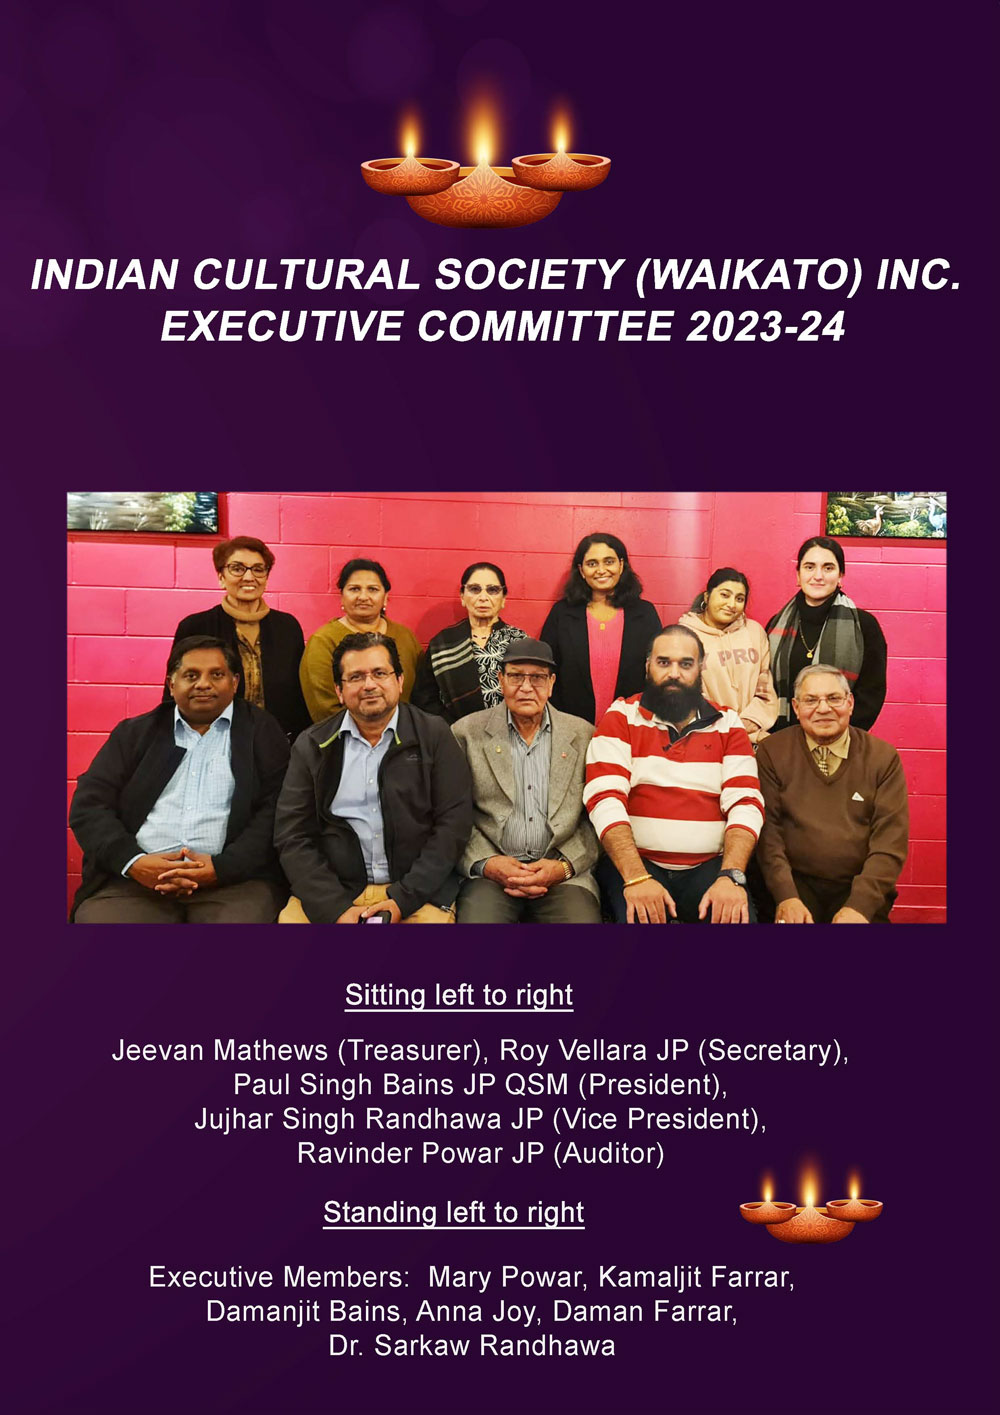 indian-cultural-society-waikato-executive-committee-nz-2023-24